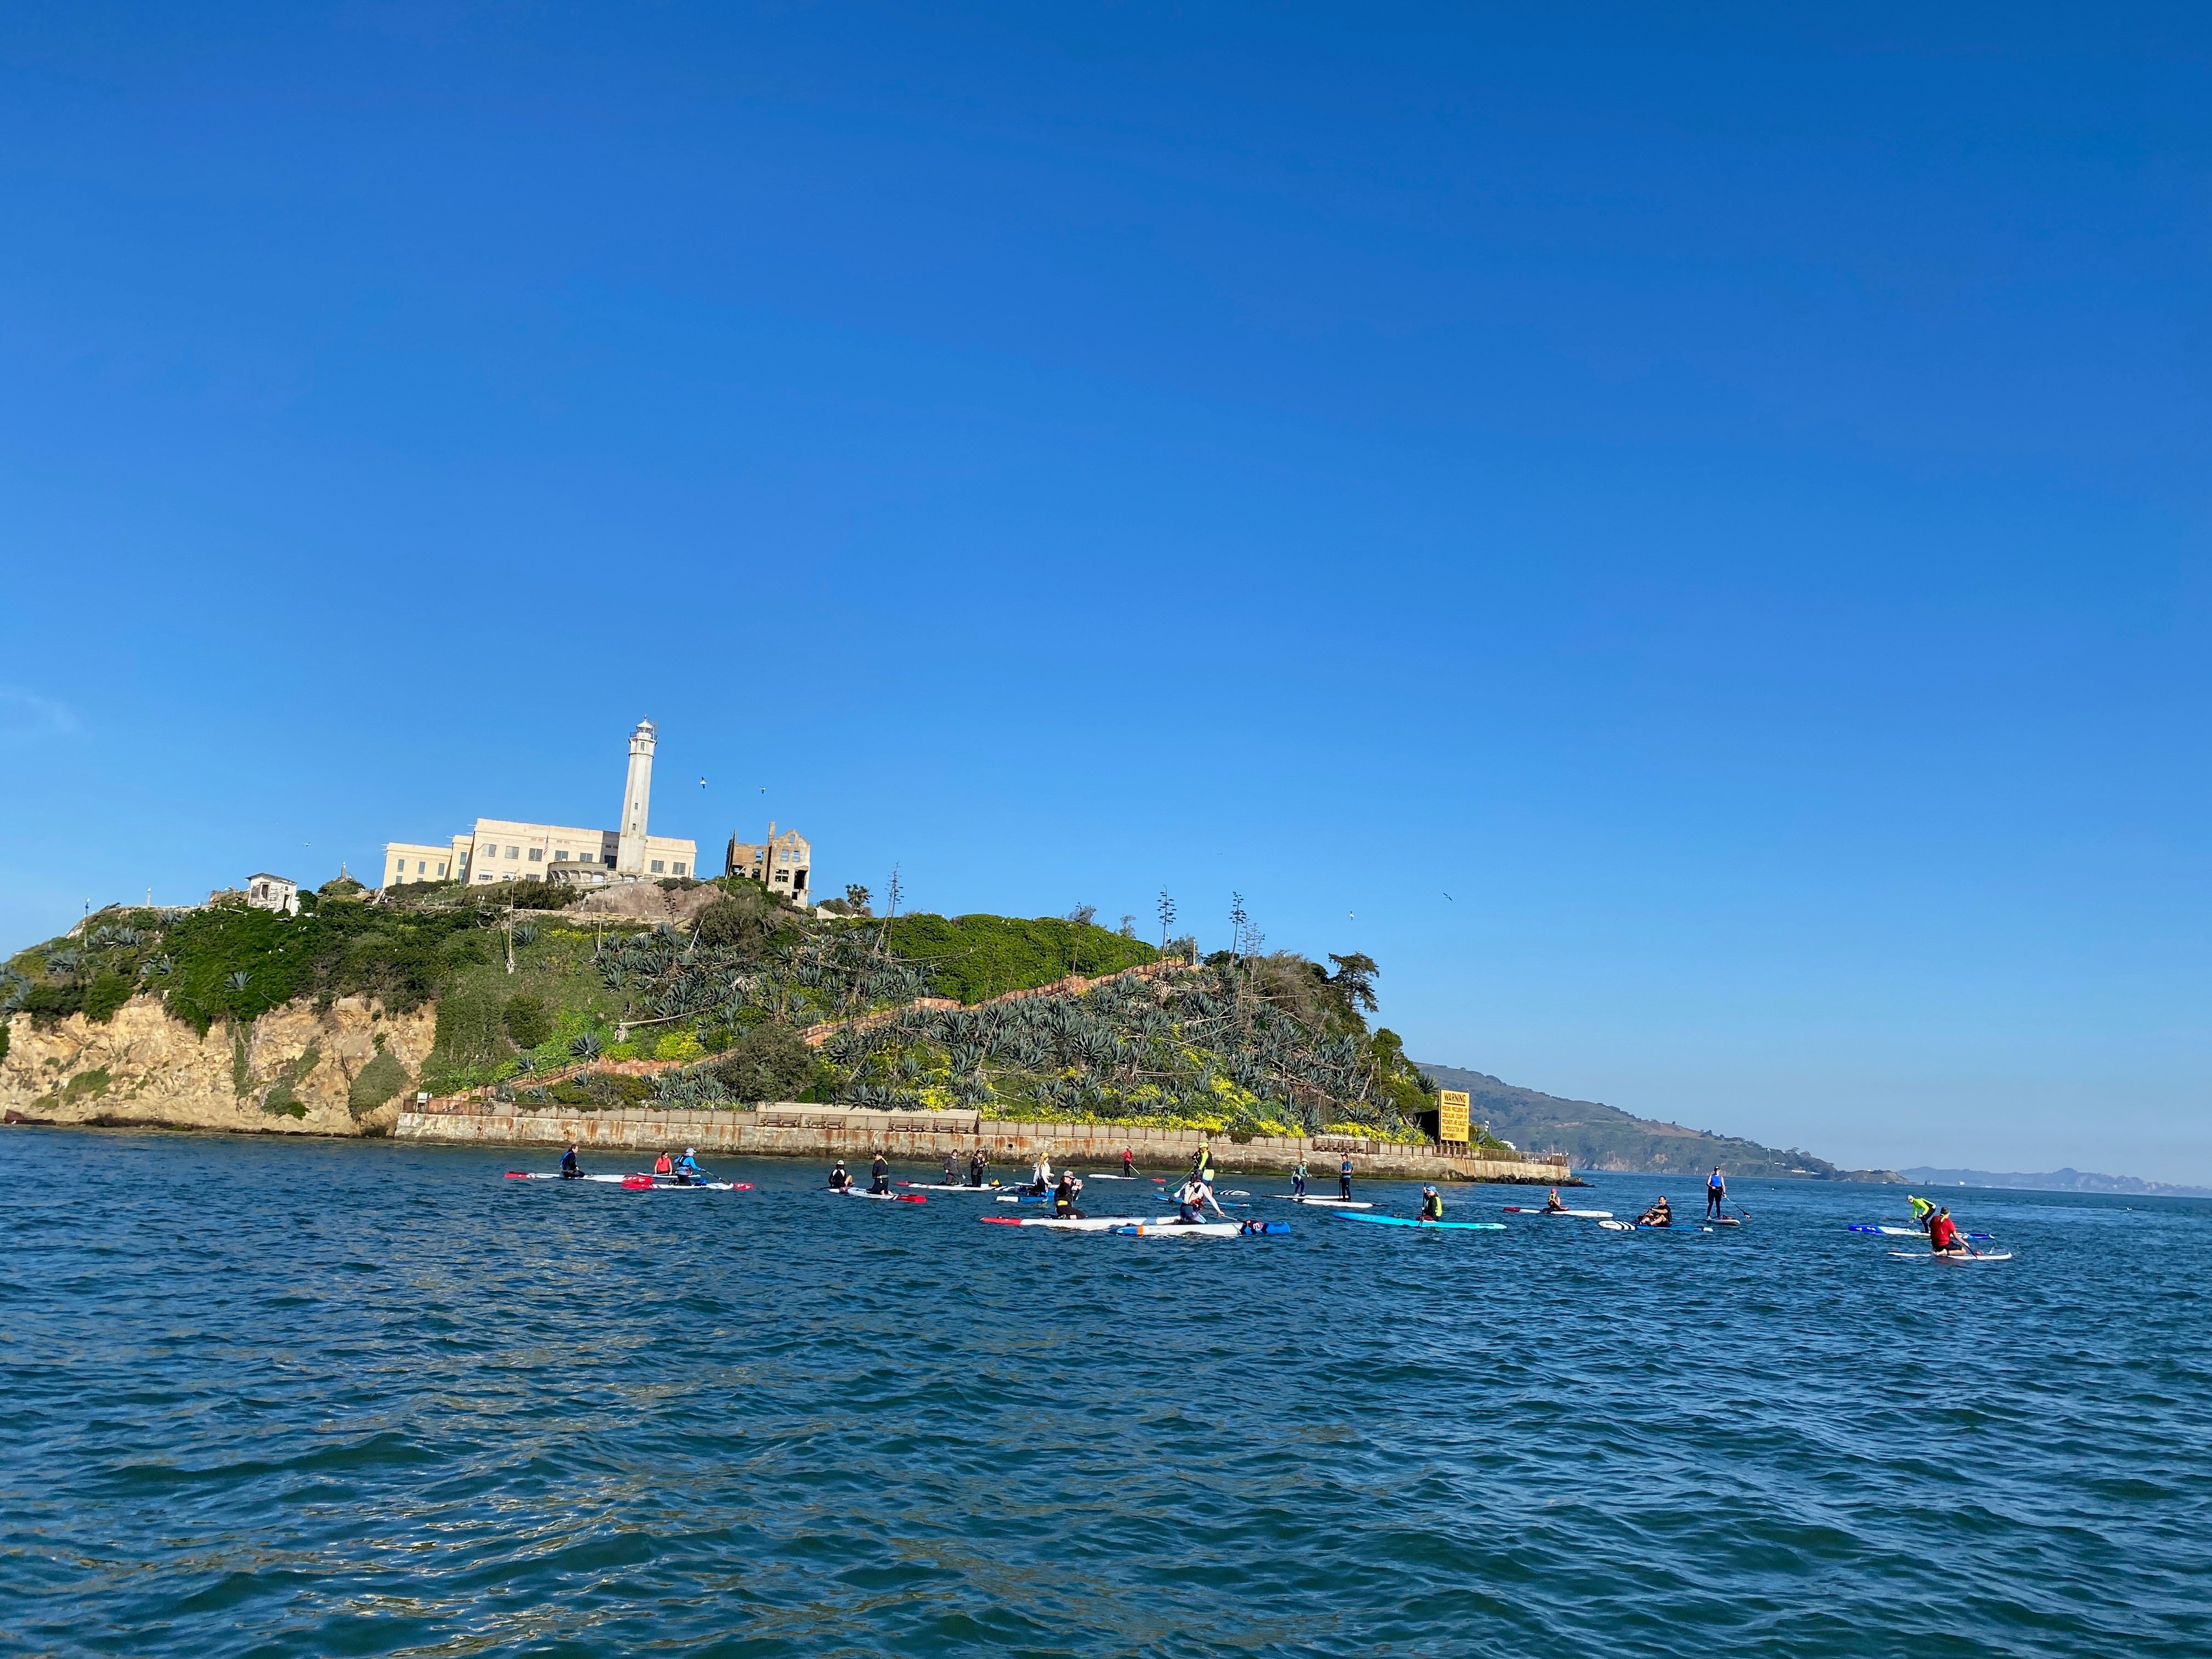 image of SUP paddle boarders in front of Alcatraz Island